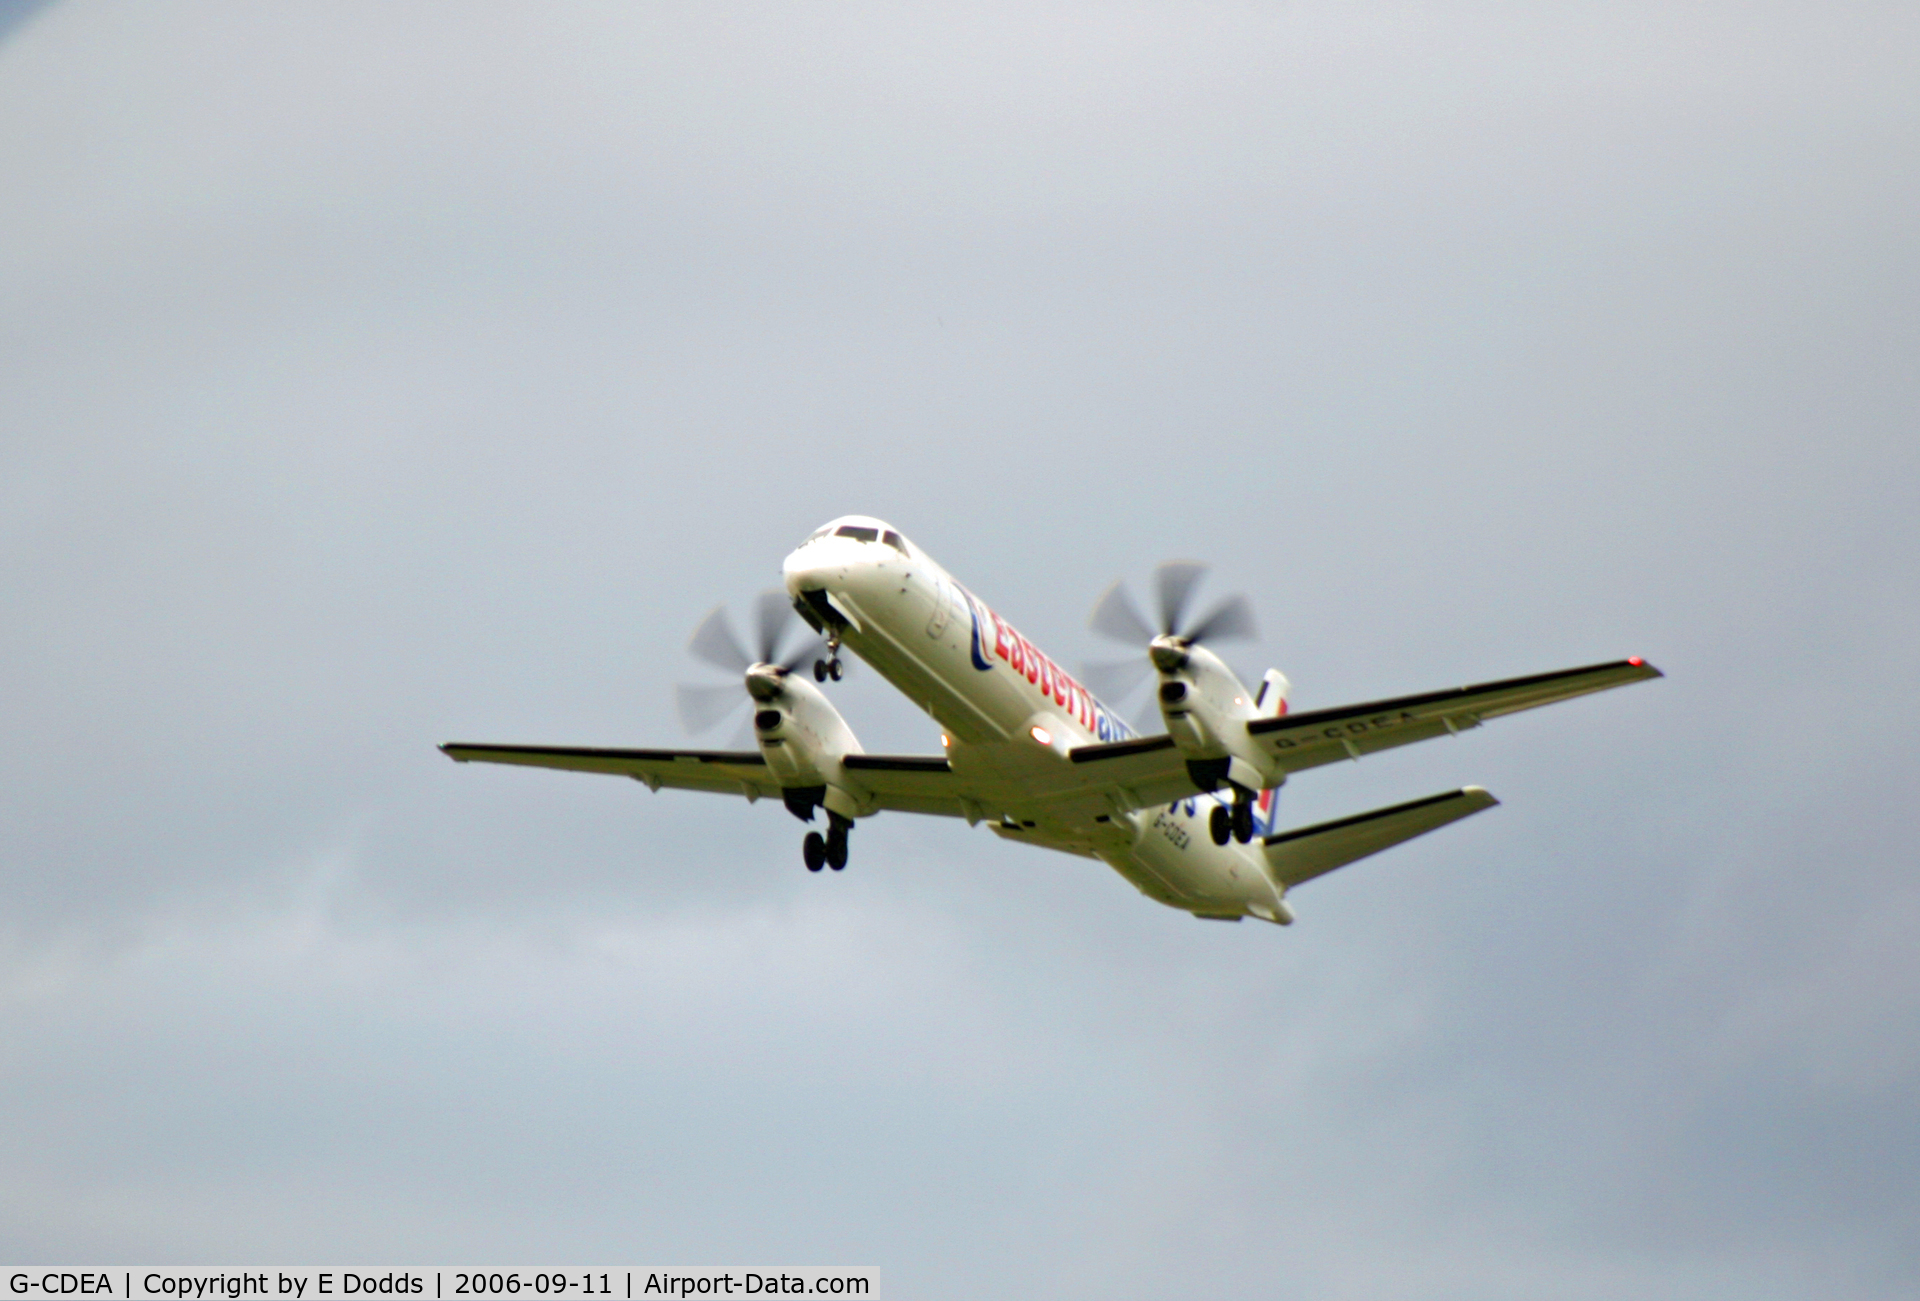 G-CDEA, 1994 Saab 2000 C/N 2000-009, Take off from Inverness